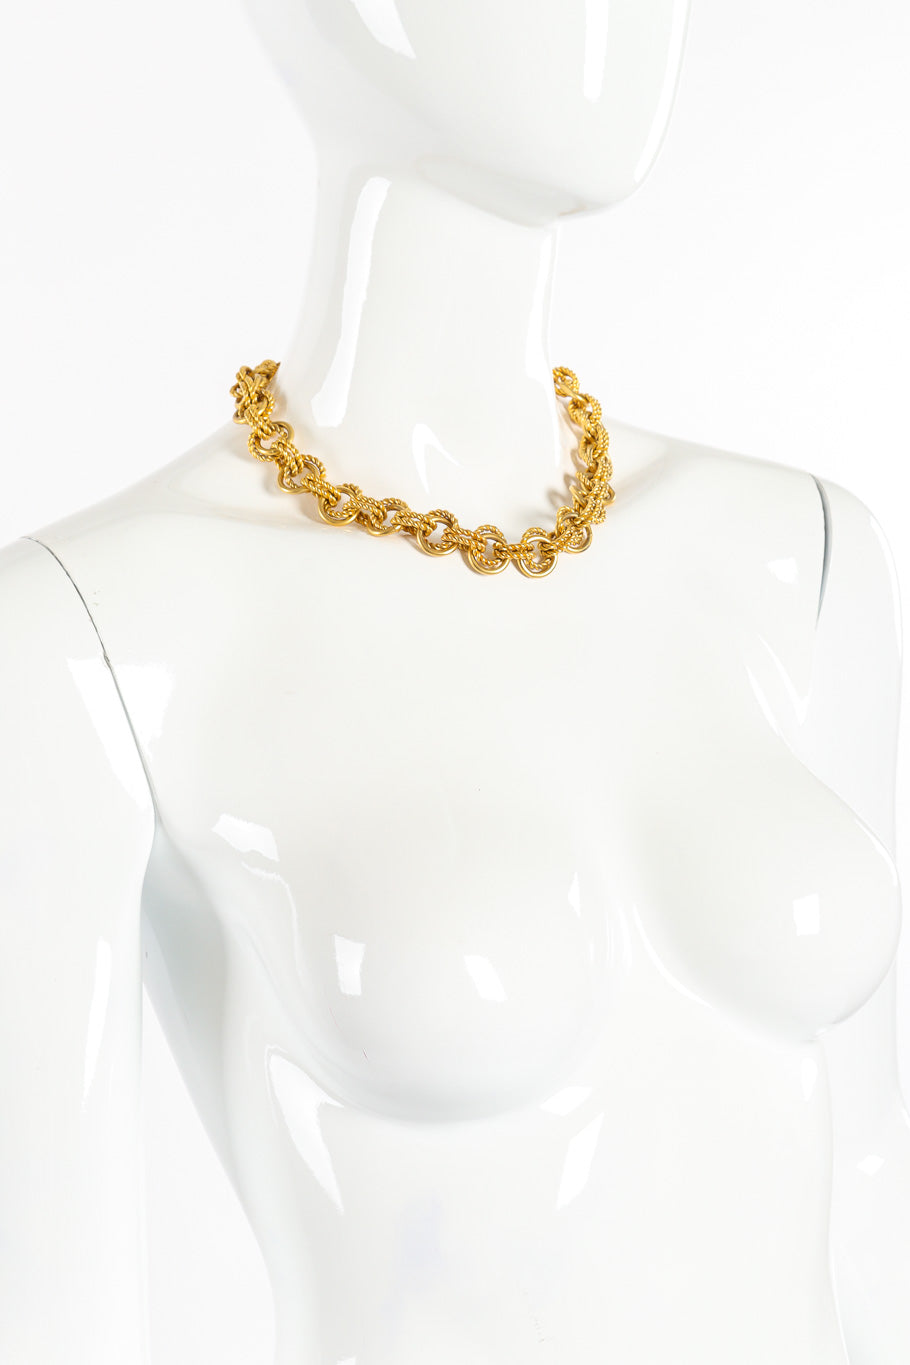 Vintage Givenchy Double Rope Chainlink Necklace on mannequin 3/4 view @Recessla